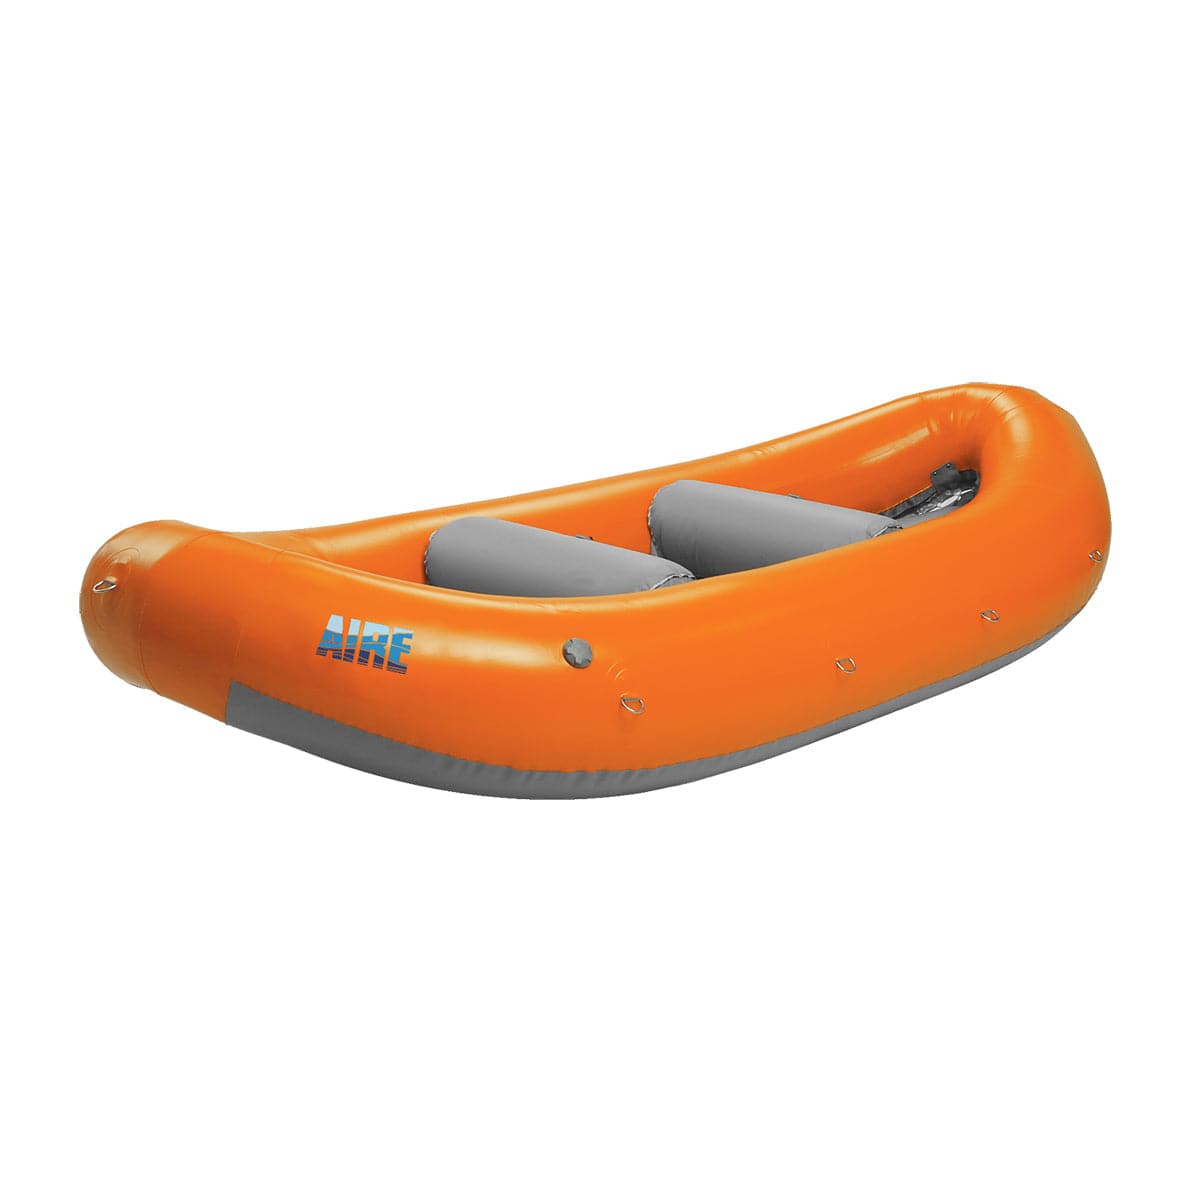 Featuring the Puma 11.5 fishing cat, fishing raft, raft manufactured by AIRE shown here from a twelfth angle.